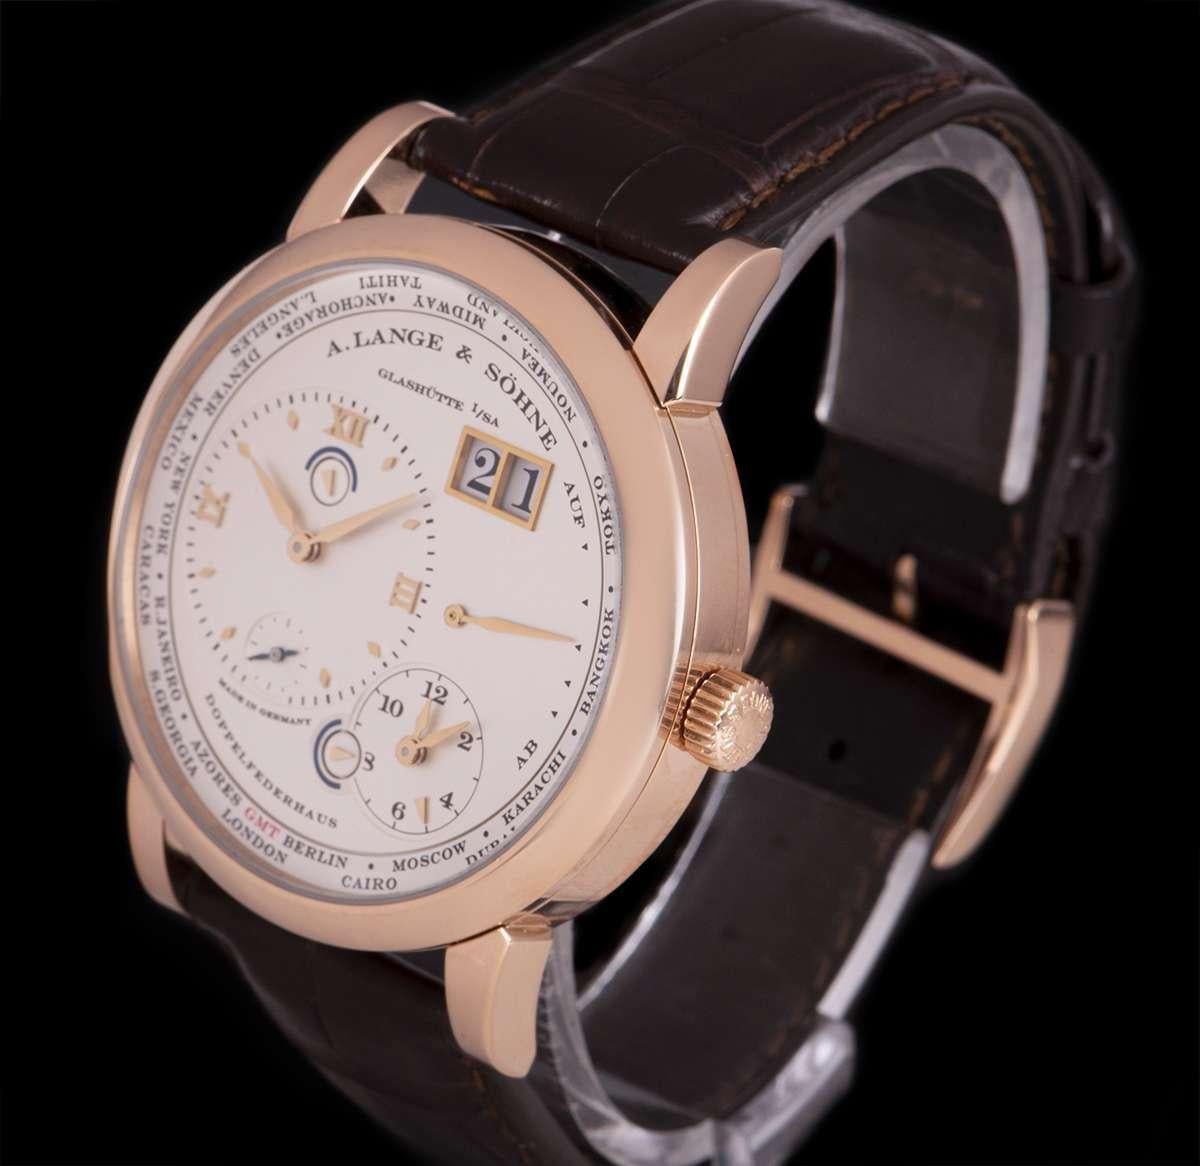 A 41.9 mm 18k Rose Gold Lange 1 Time Zone Gents Wristwatch, silver main dial - date at 1 0'clock, power reserve indicator at 3 0'clock, second time zone at 5 0'clock with day and night indicator, silver off-centred dial with applied hour markers and